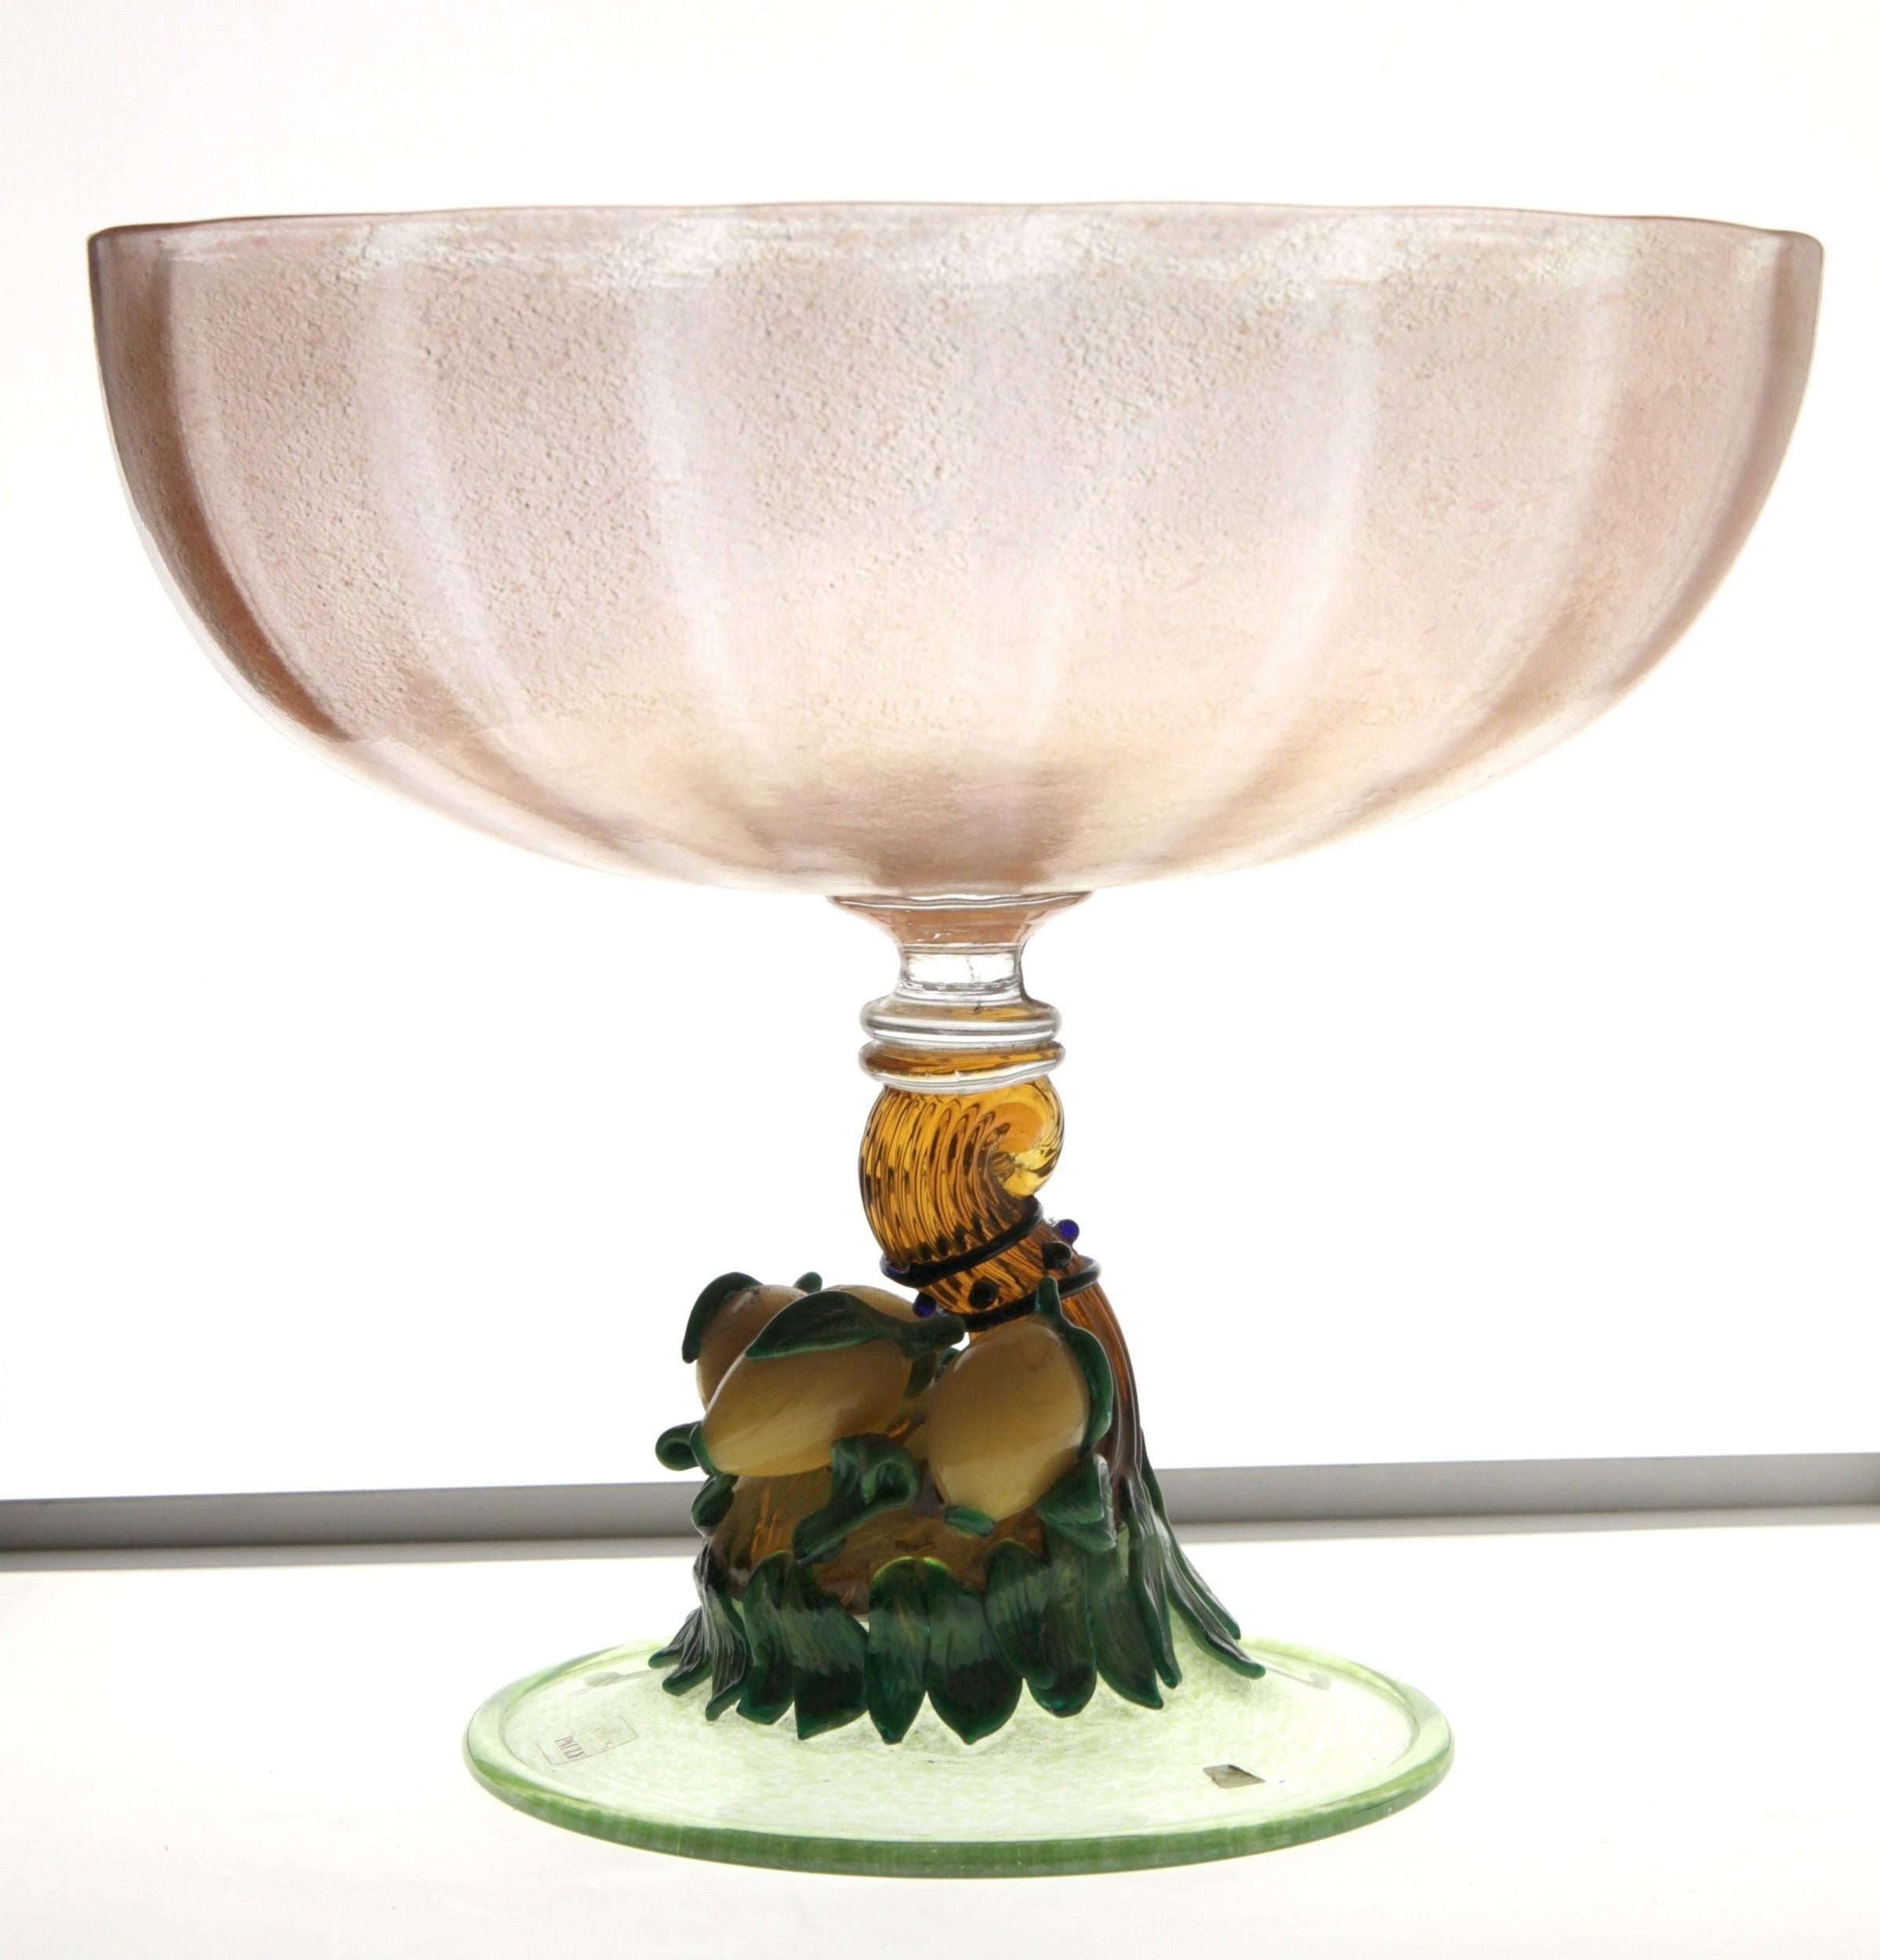 Mid-Century Modern Pauly Venice Cornucopia Footed Bowl, Murano Glass, Gold Leaf Applications, 1960s